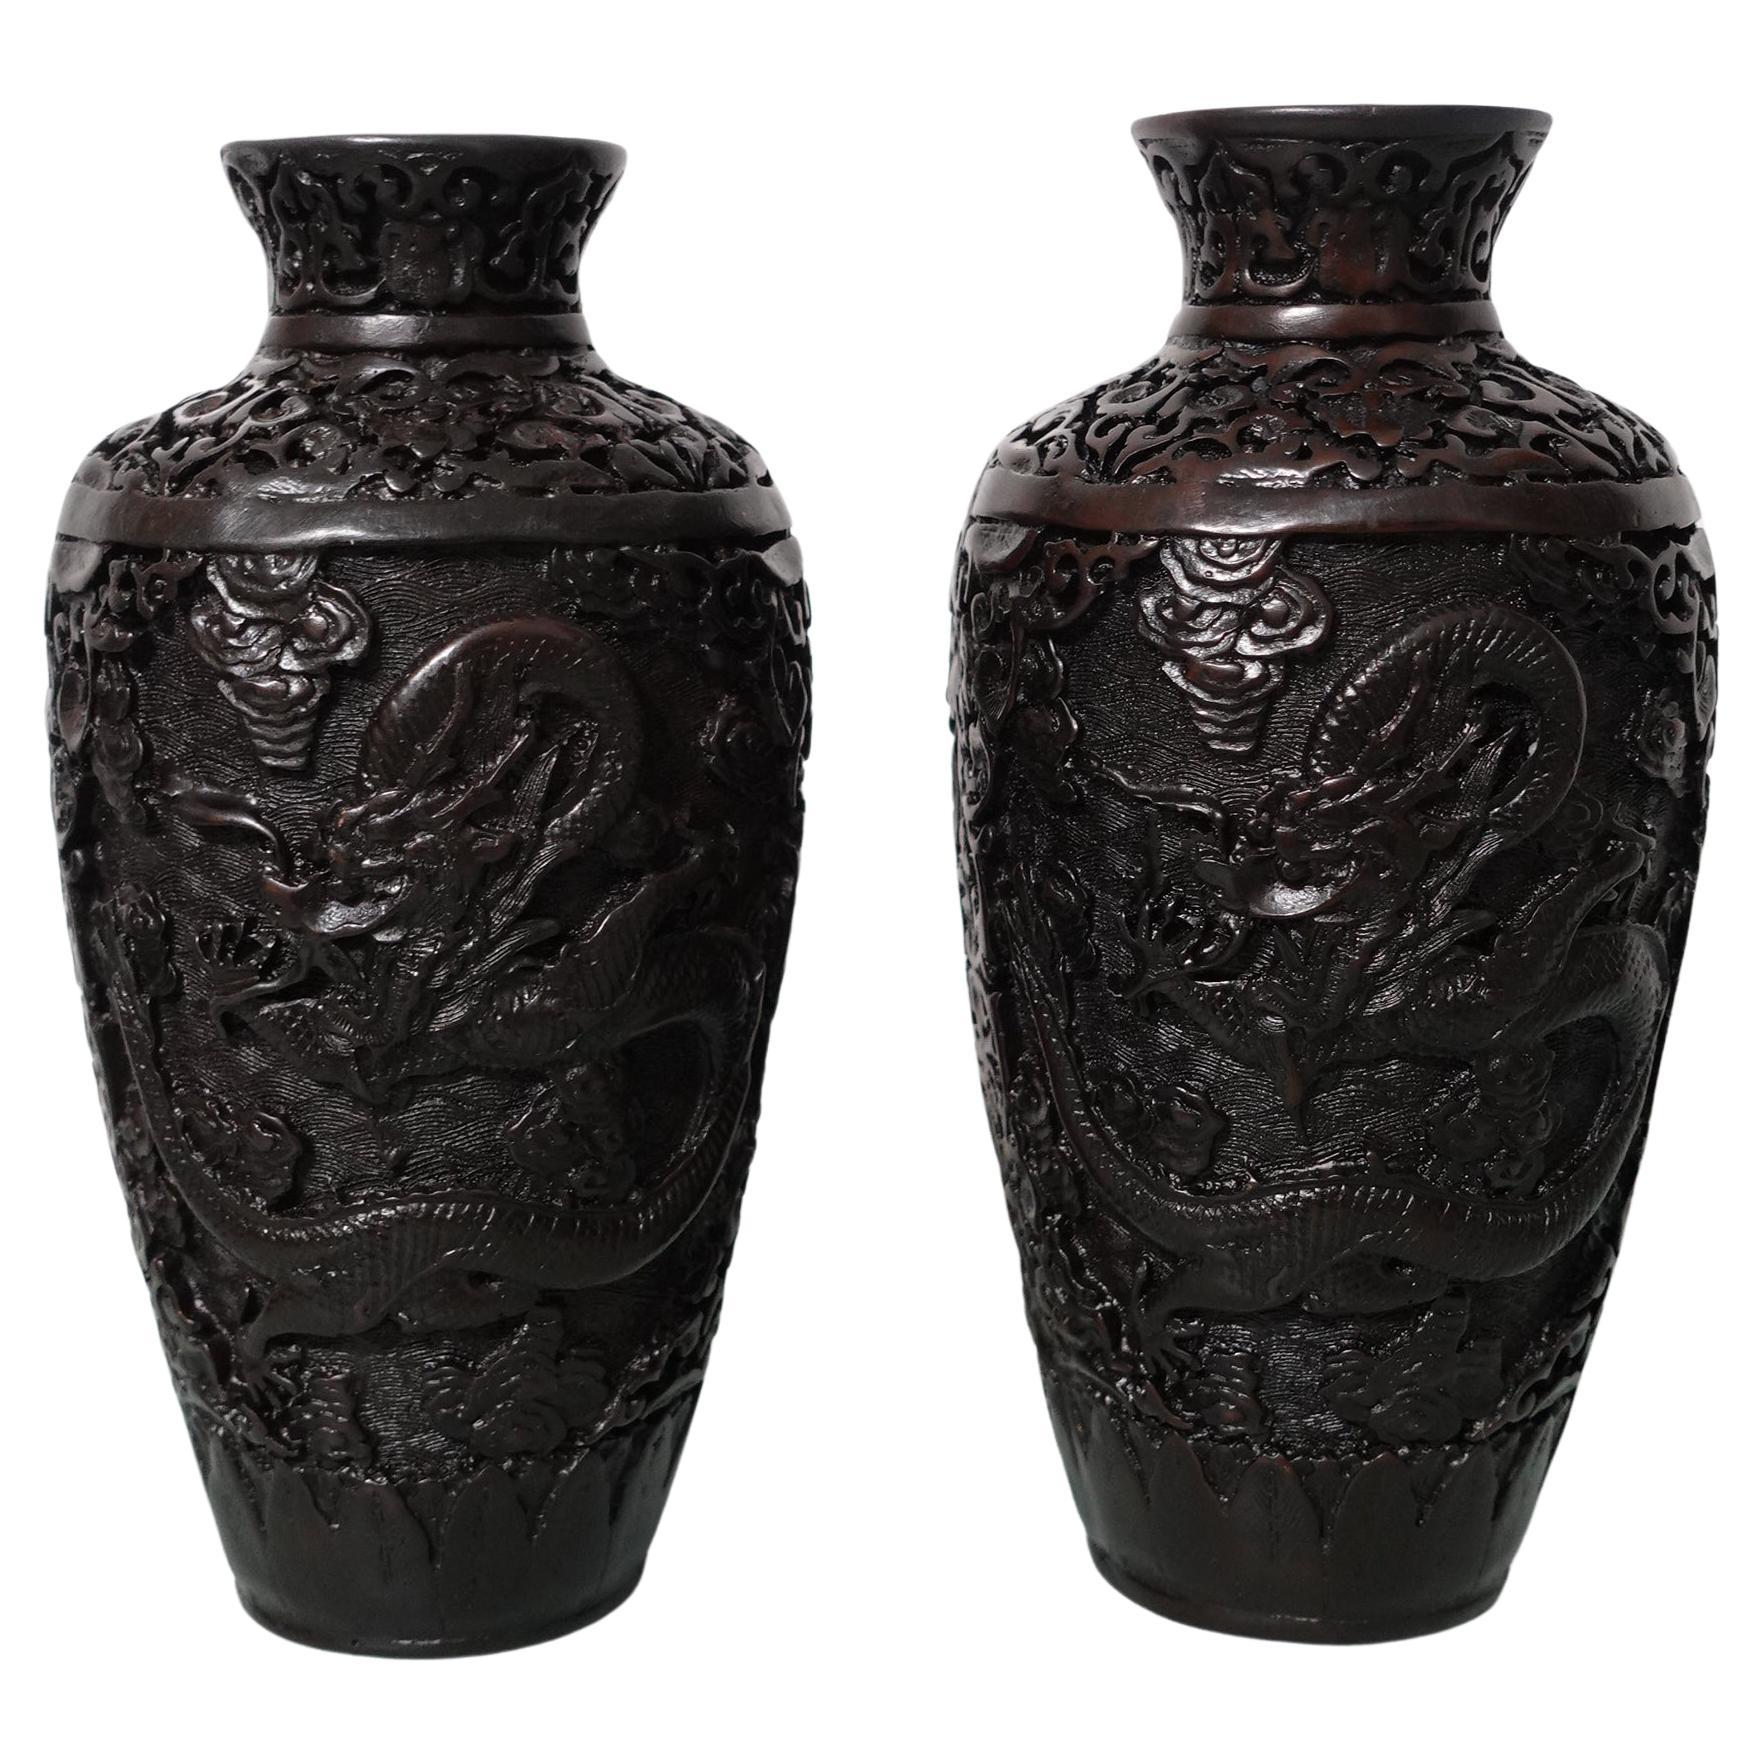 Carved Metal all over with large reserves on two sides of a dragon chasing a flaming pearl. With all-over floral and bat patterns.